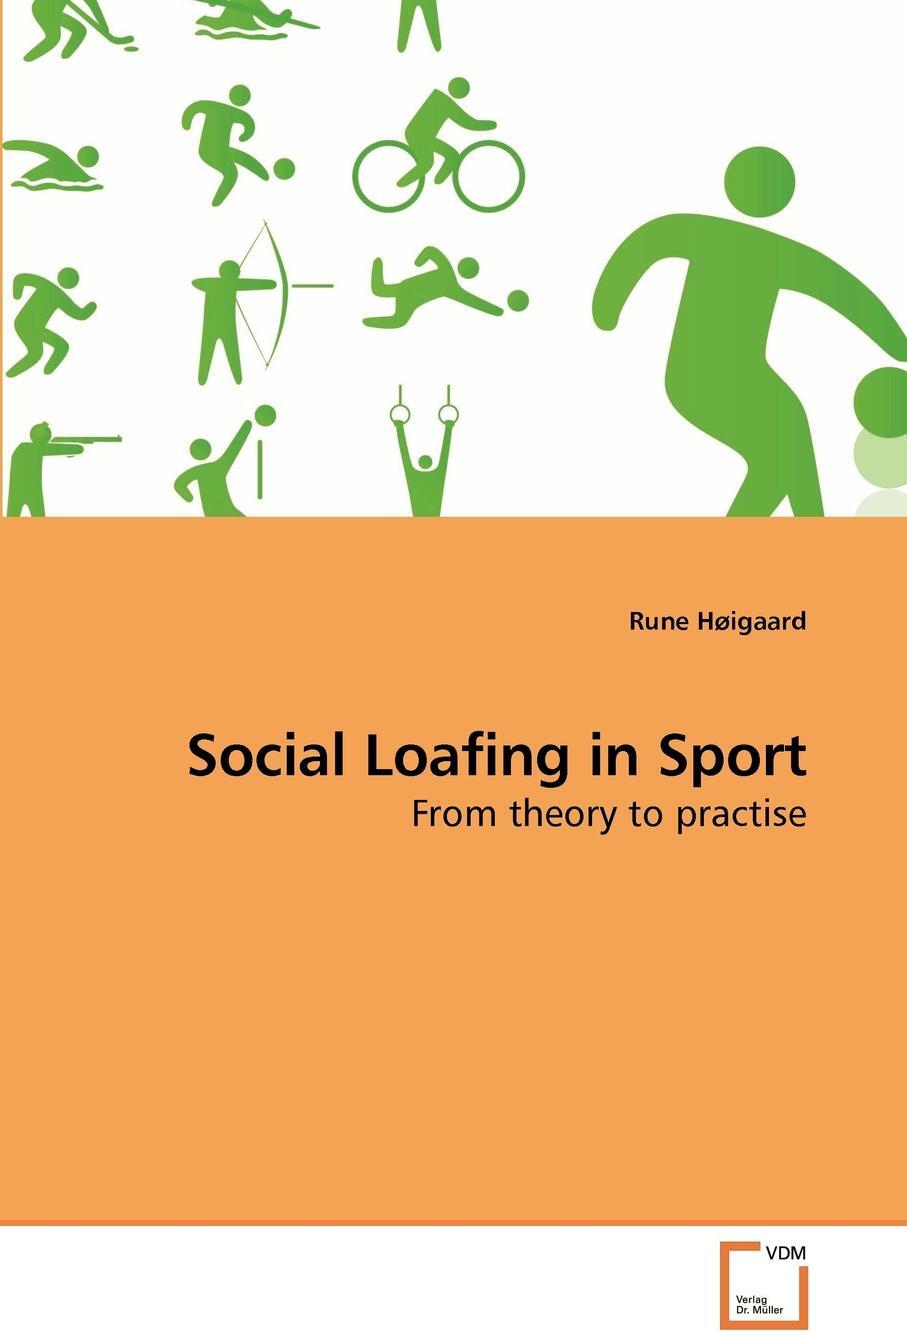 Society sport. Social Loafing. From Theory to Practice. If practise Sports, i.